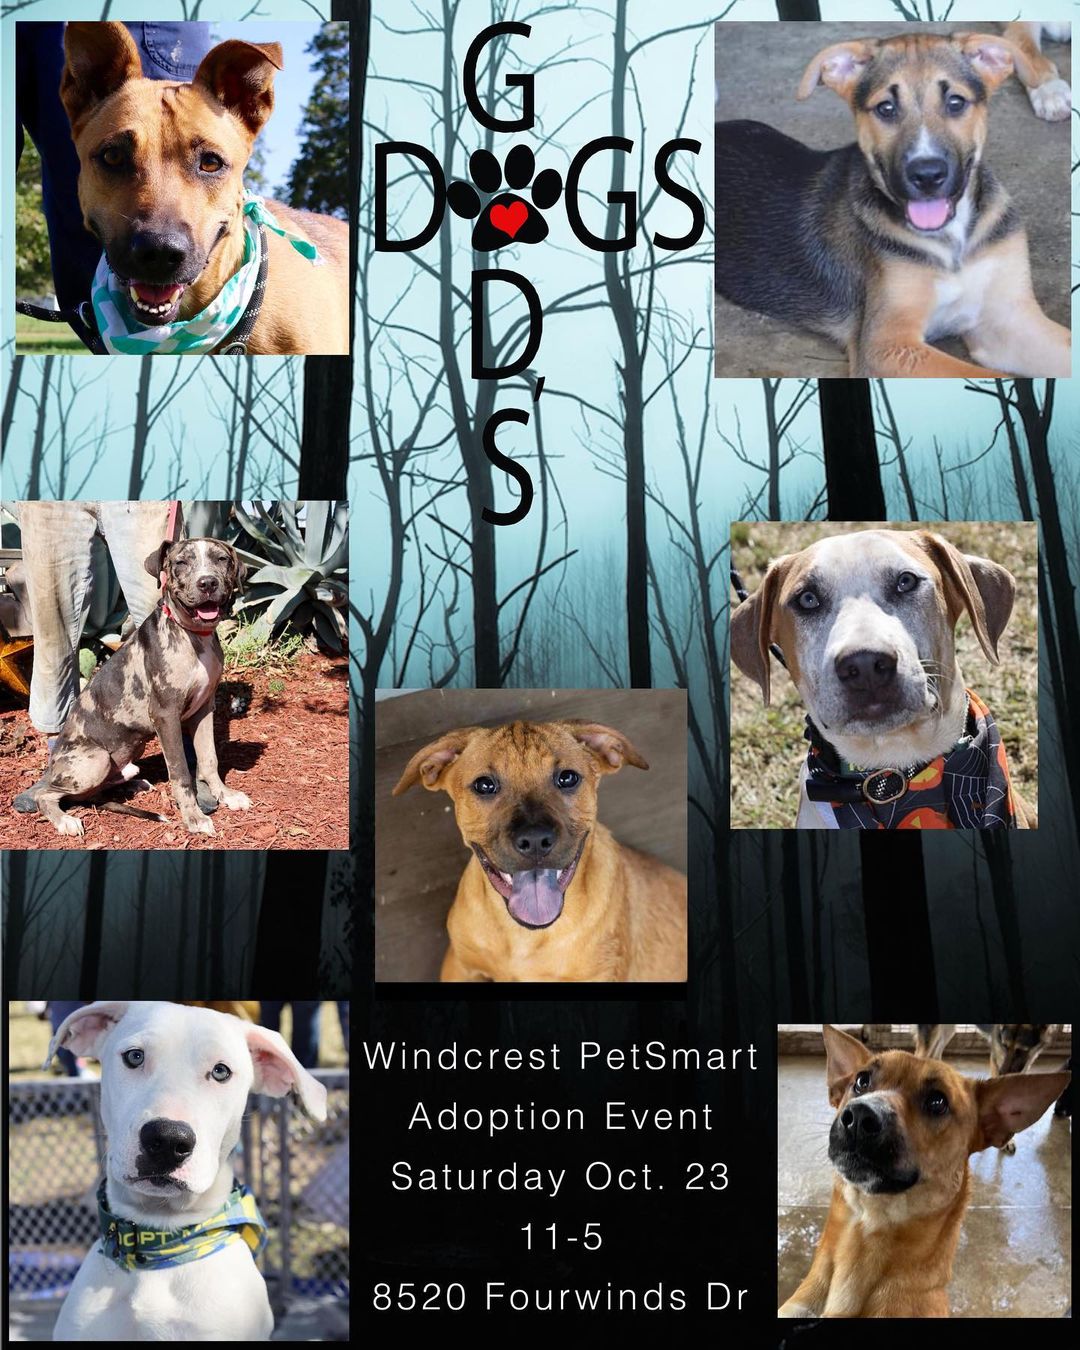 Tomorrow! We have 3 amazing locations for adoptions. This will be one of them and we hope you’ll be able to make it out <a target='_blank' href='https://www.instagram.com/explore/tags/godsdogsatx/'>#godsdogsatx</a>